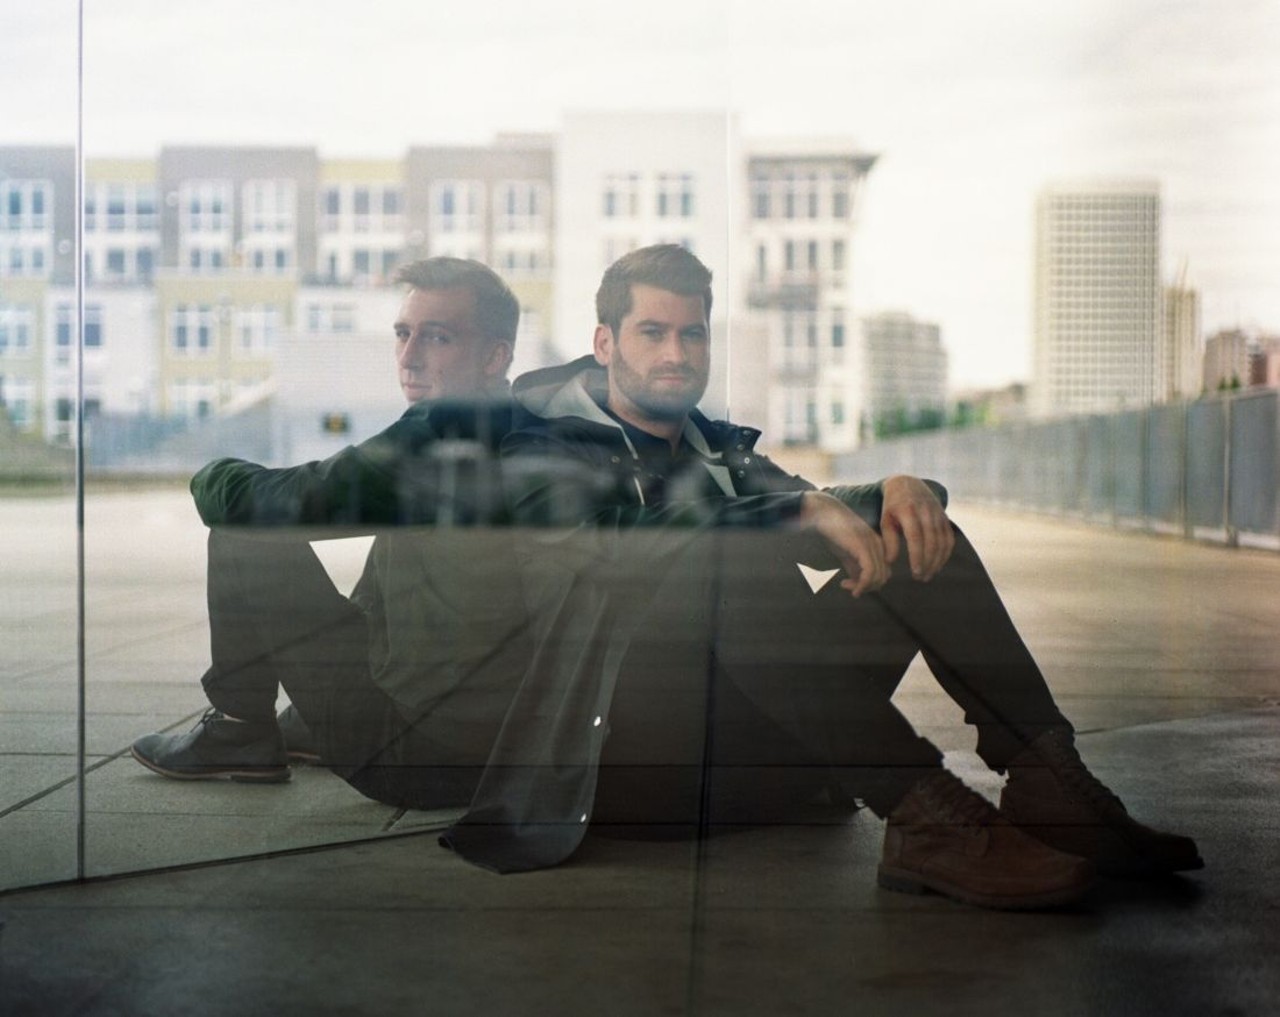  Odesza
May 4, 7:30 p.m., Jacob&#146;s Pavillion
Take in the warm weather at Jacob&#146;s Pavillion as Odesza brings their breezy EDM to the outdoor venue as part of their A Moment Apart Tour.
Photo via  Tonje Thilesen/Cleveland Scene